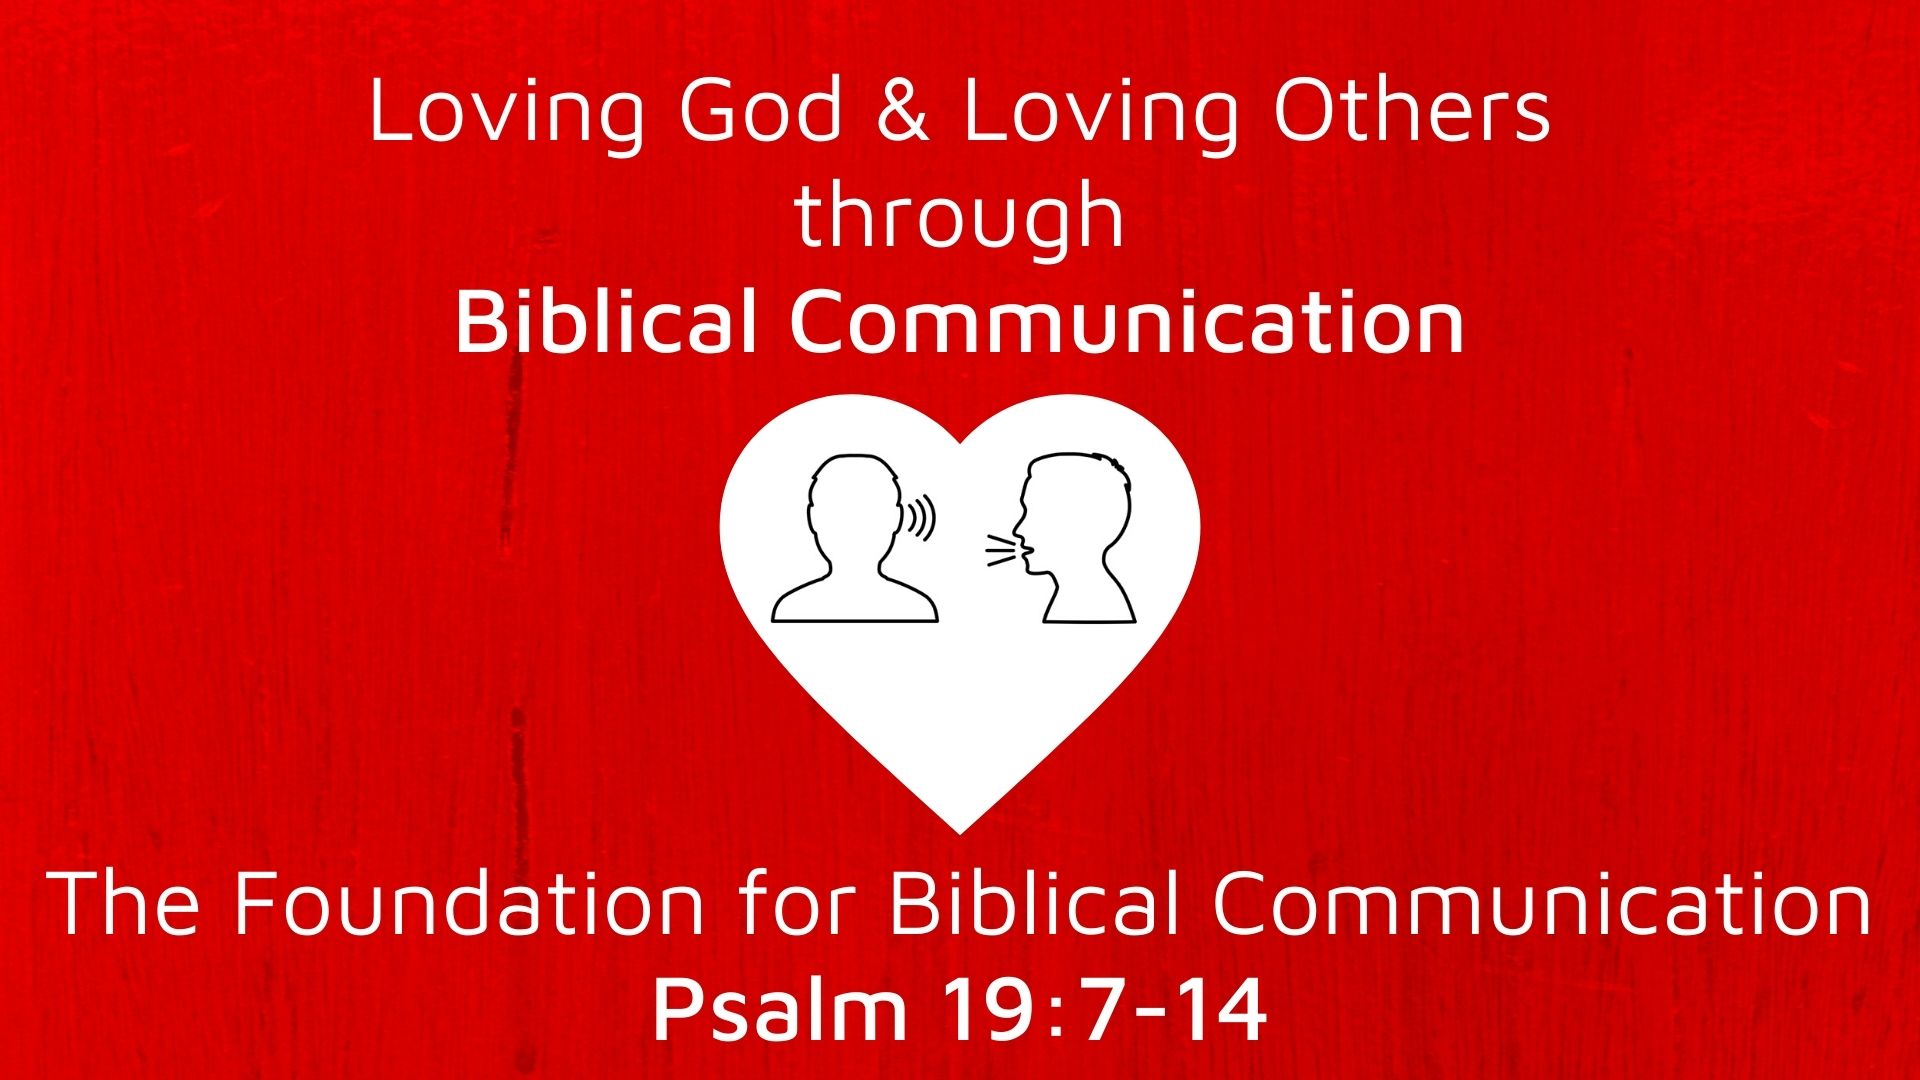 The Foundation for Biblical Communication (Psalm 19:7-14) Image